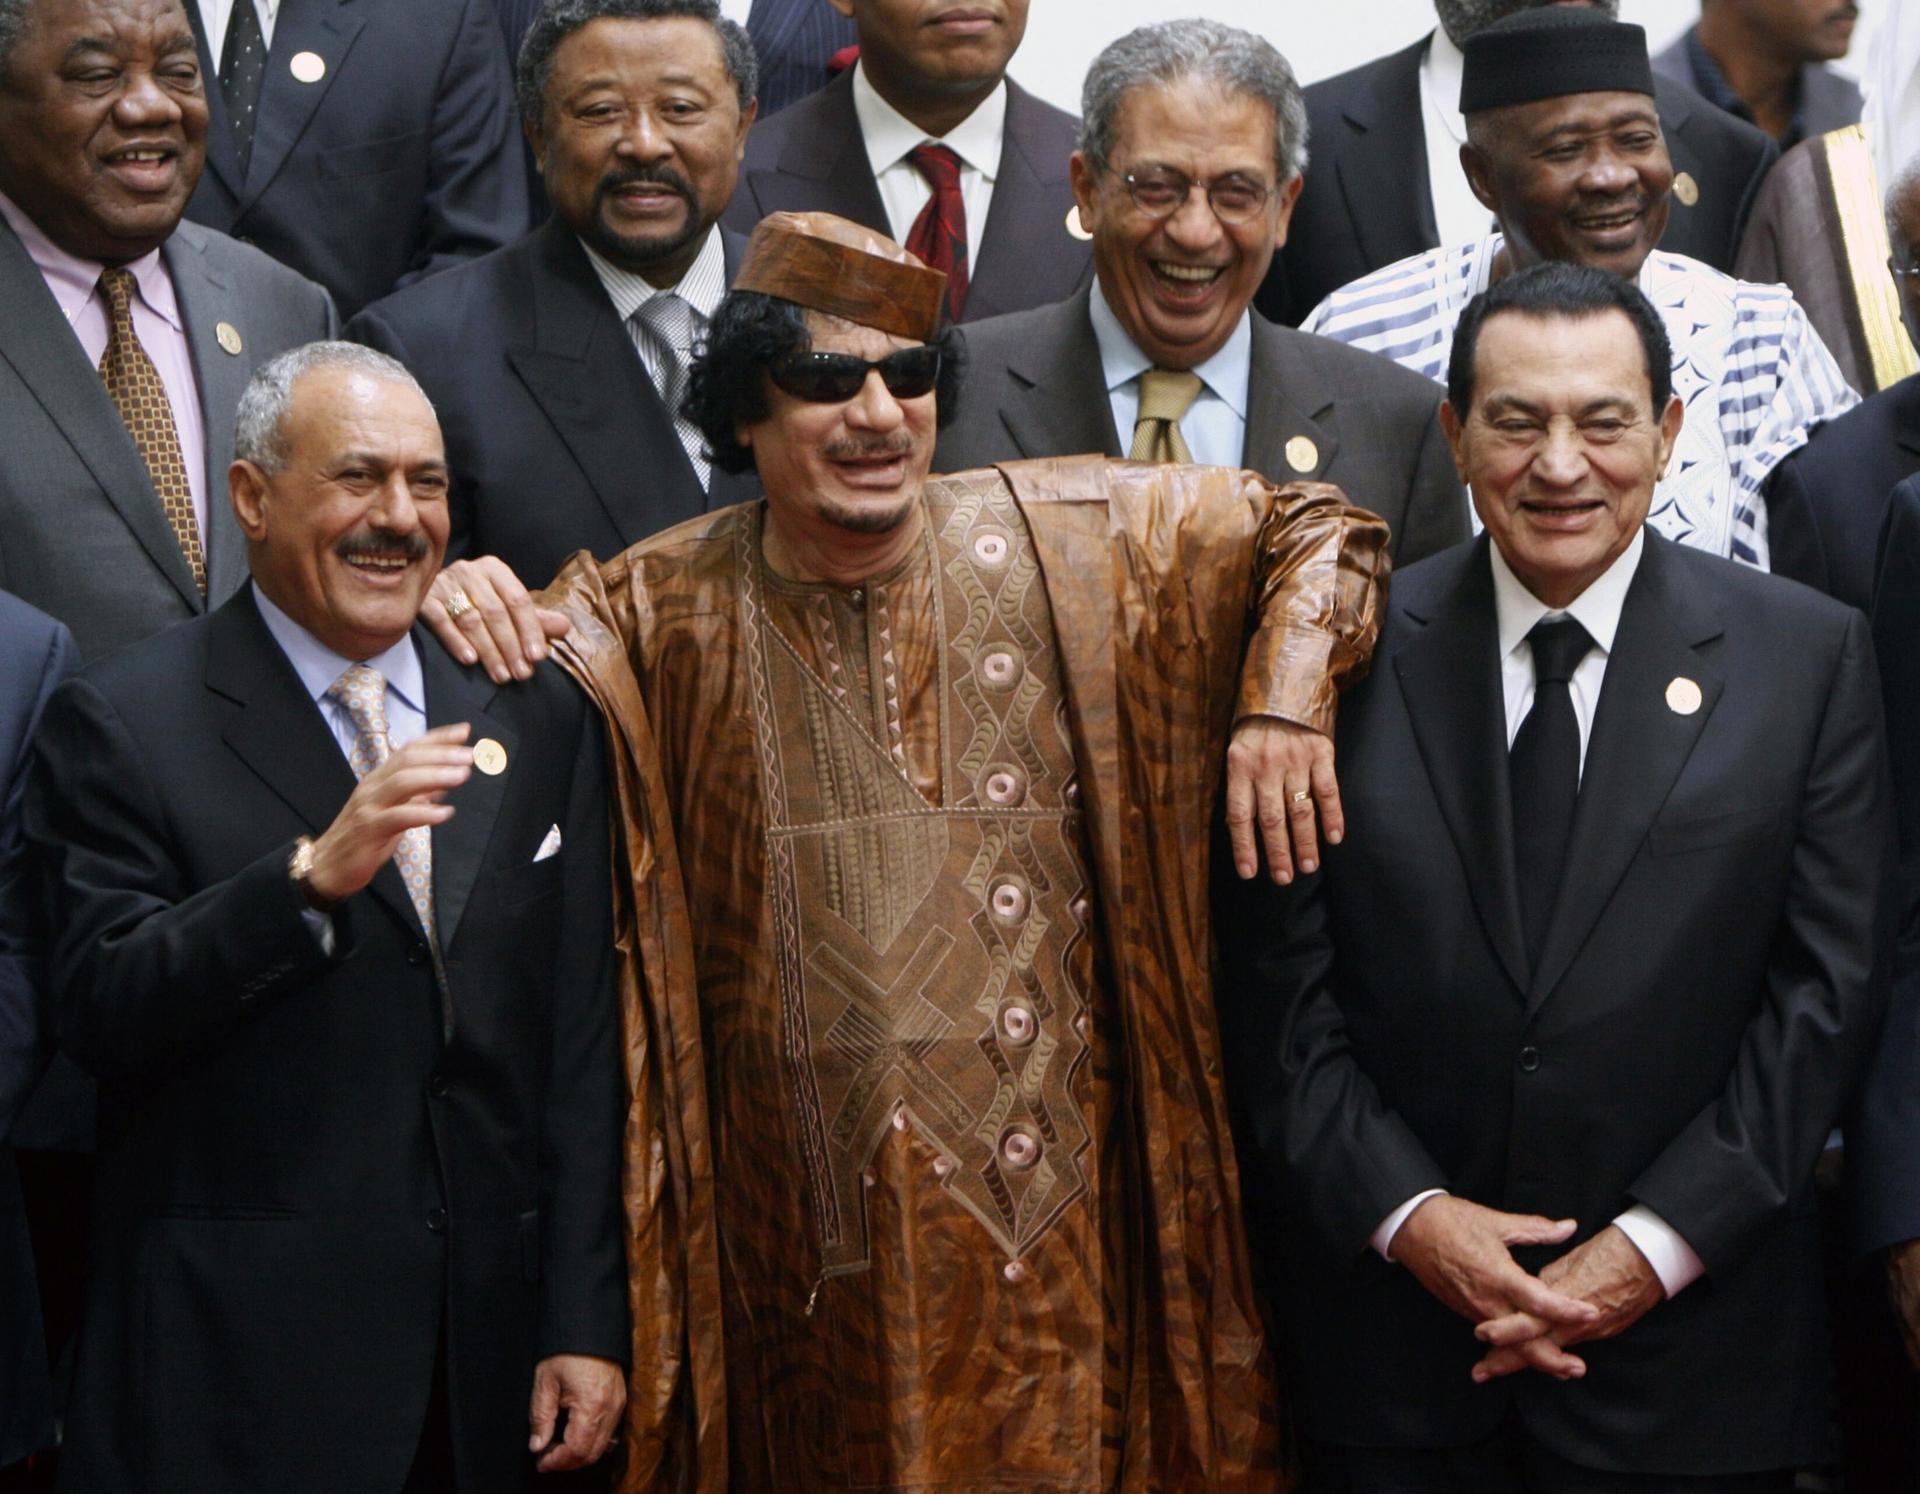 In this Oct. 10, 2010 file photo, Libyan leader Moammar Gadhafi, center, with Egyptian President Hosni Mubarak, right, and his Yemeni counterpart Ali Abdullah Saleh, left, pose during a group picture with Arab and African leaders during the second Afro-Ar